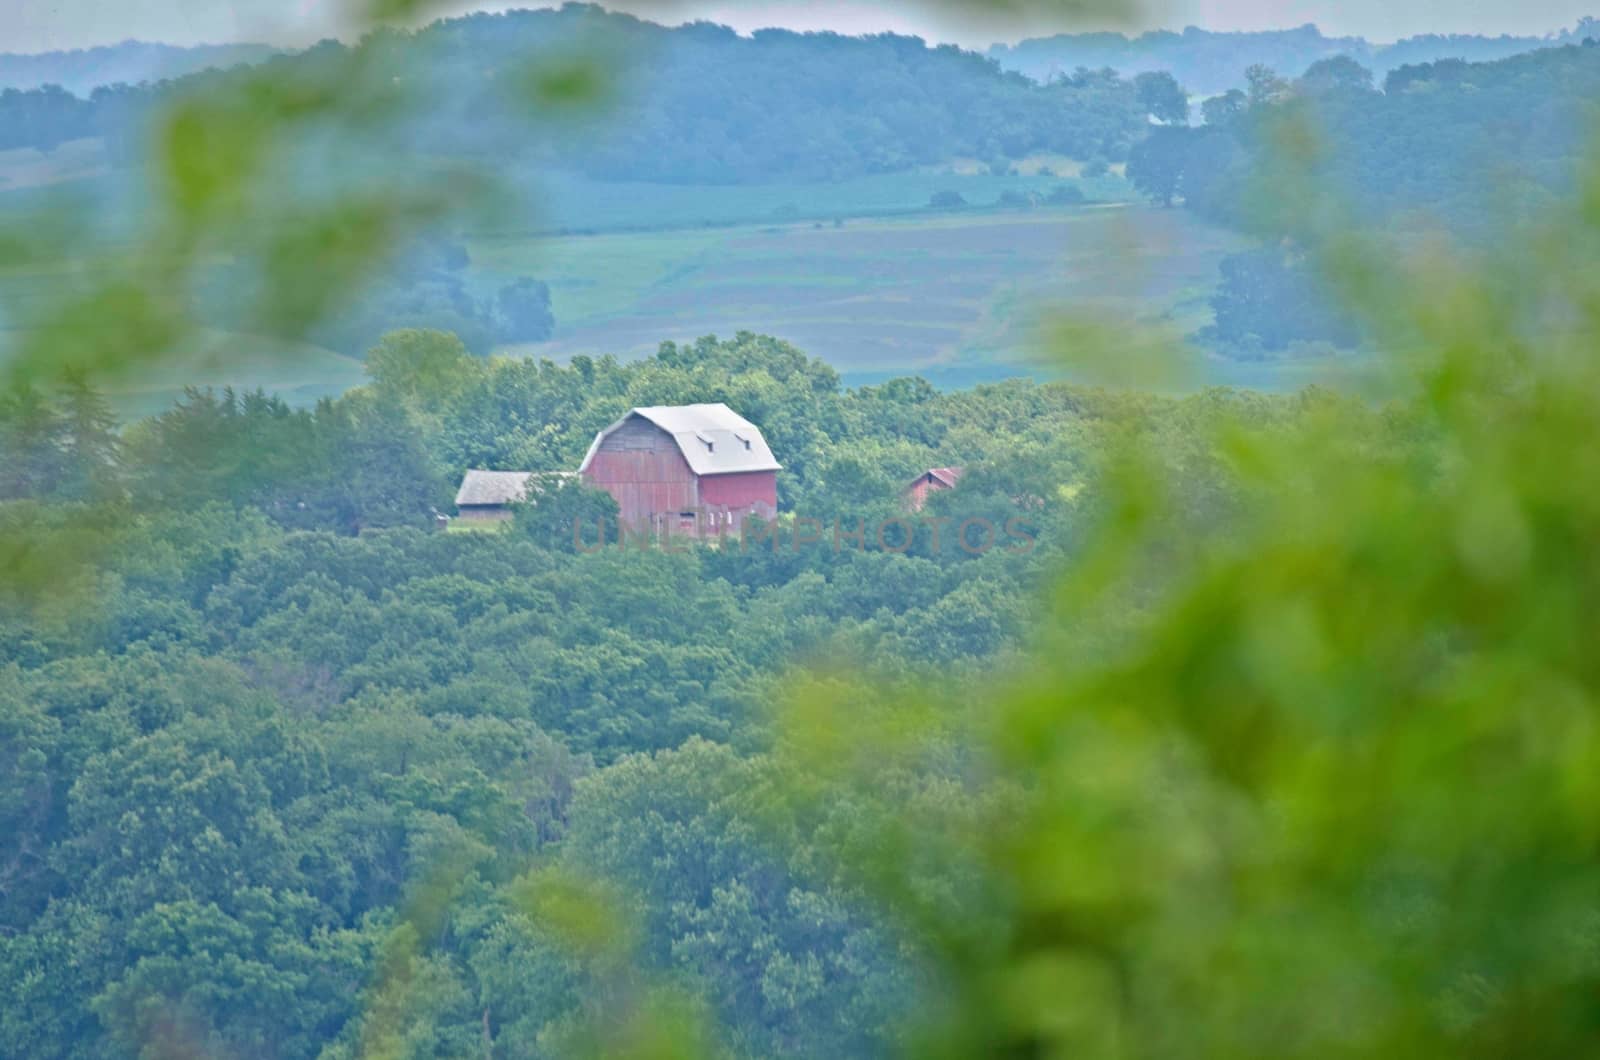 This is an old family farm on a midwestern summer's day.